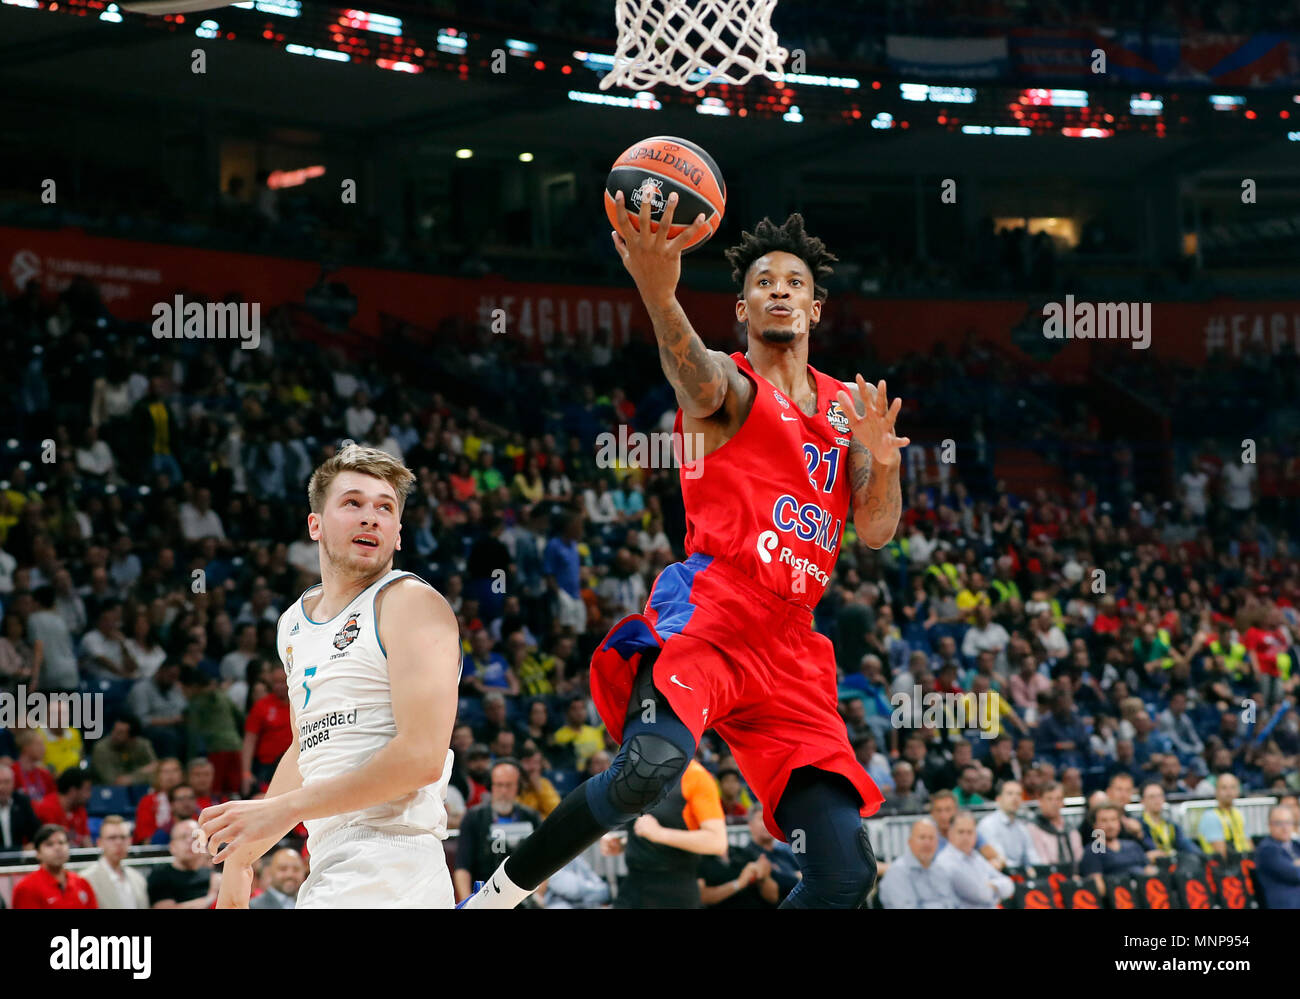 Belgrade. 18th May, 2018. CSKA Moscow's Will Clyburn(R) goes for a dunk during Euroleague Final 4 semi final basketball match between CSKA Moscow and Real Madrid in Belgrade, Serbia on May 18, 2018. Real Madrid won 92-83. Credit: Predrag Milosavljevic/Xinhua/Alamy Live News Stock Photo